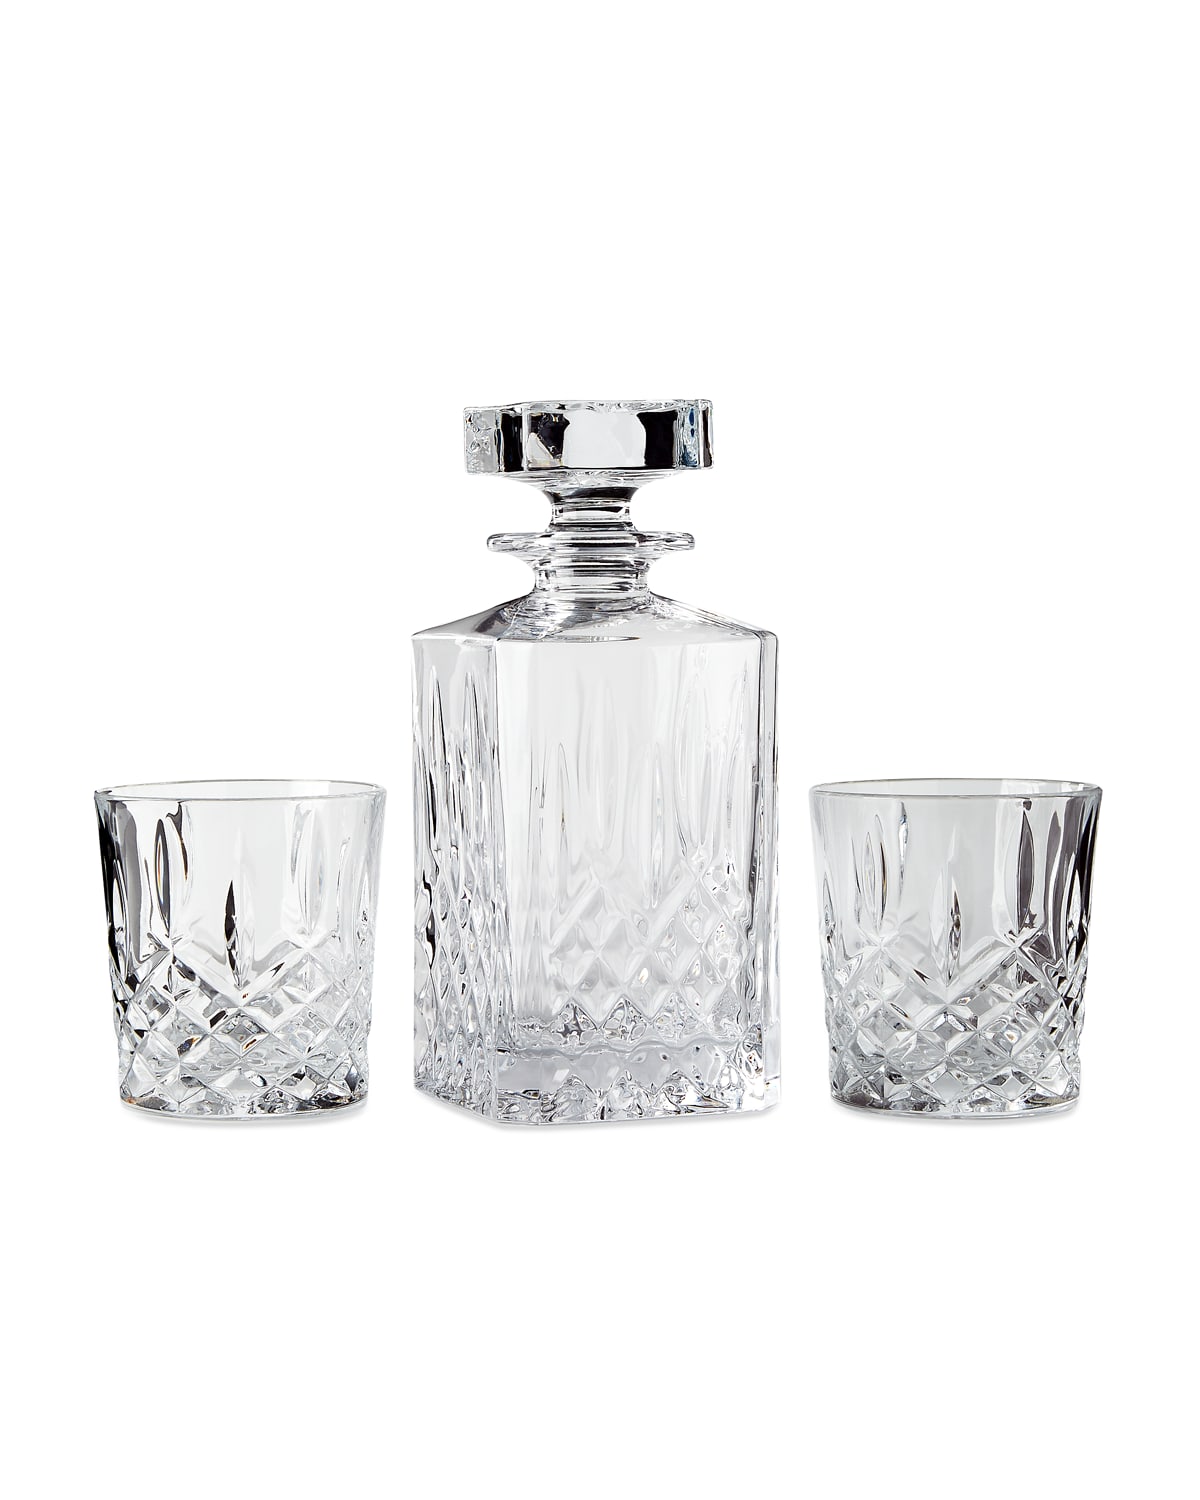 Marquis By Waterford Markham Square Decanter & Two Double Old-fashioned Glasses